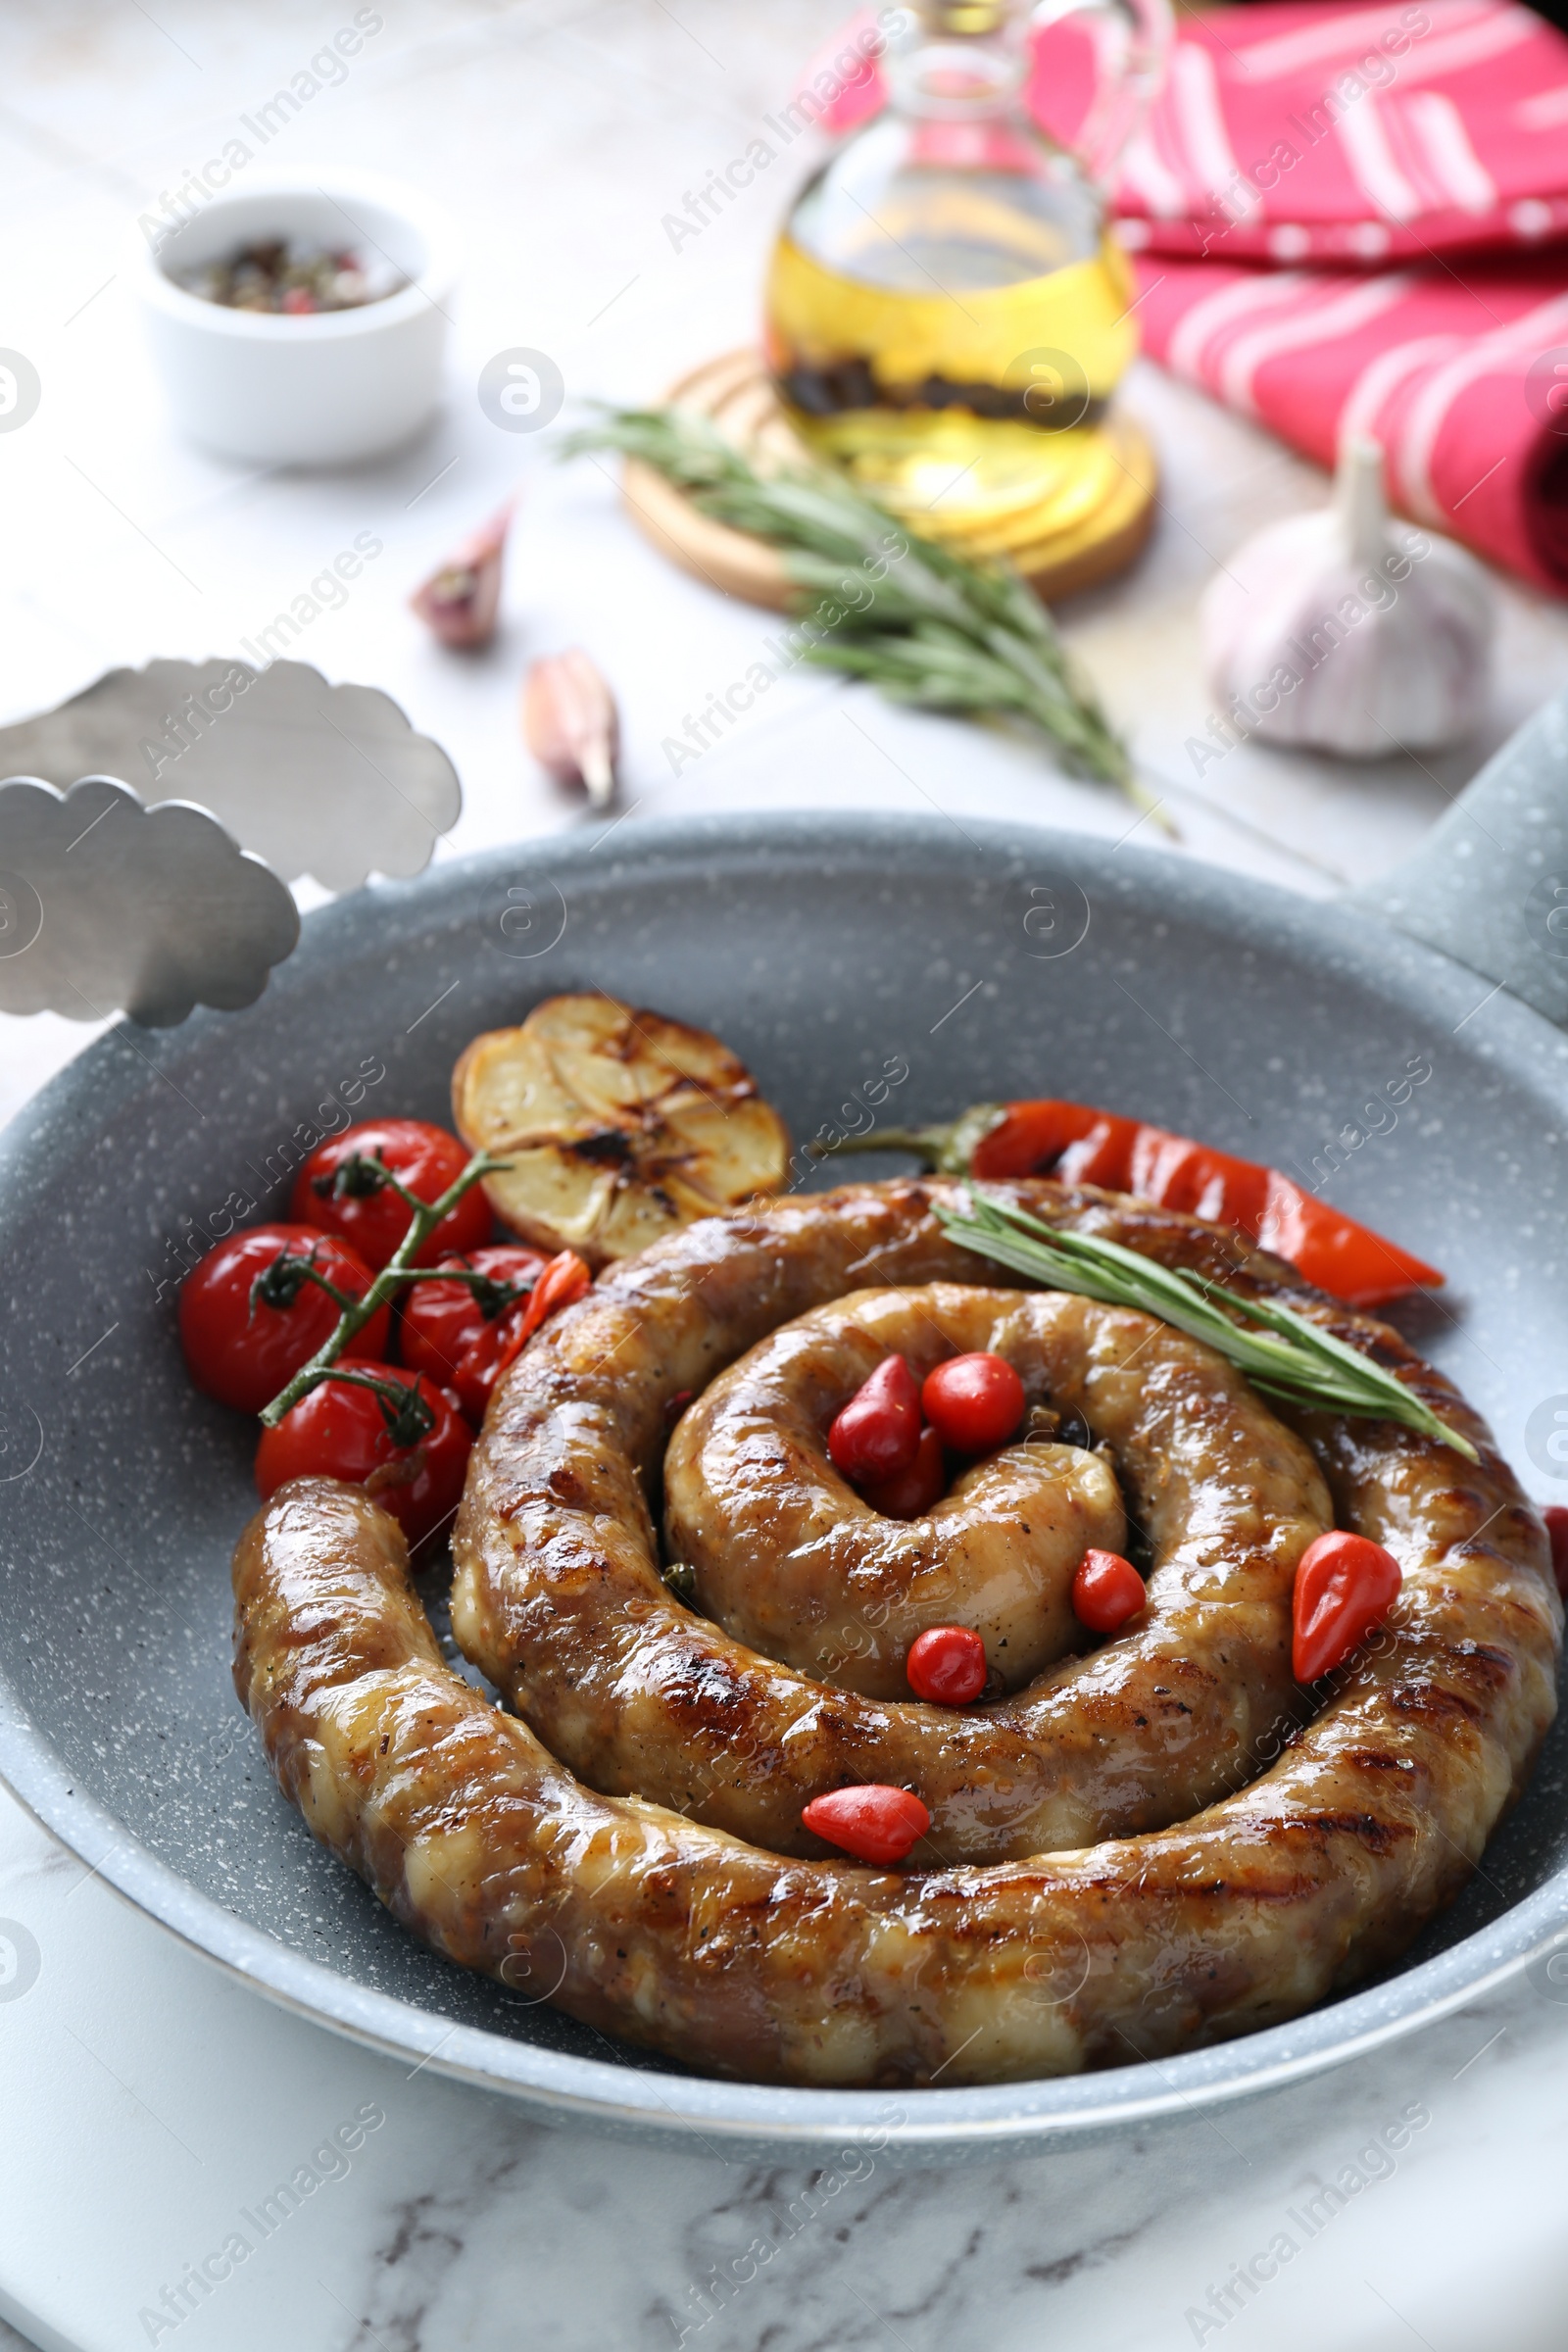 Photo of Delicious homemade sausage with garlic, tomatoes, rosemary and chili in frying pan served on light tiled table, closeup